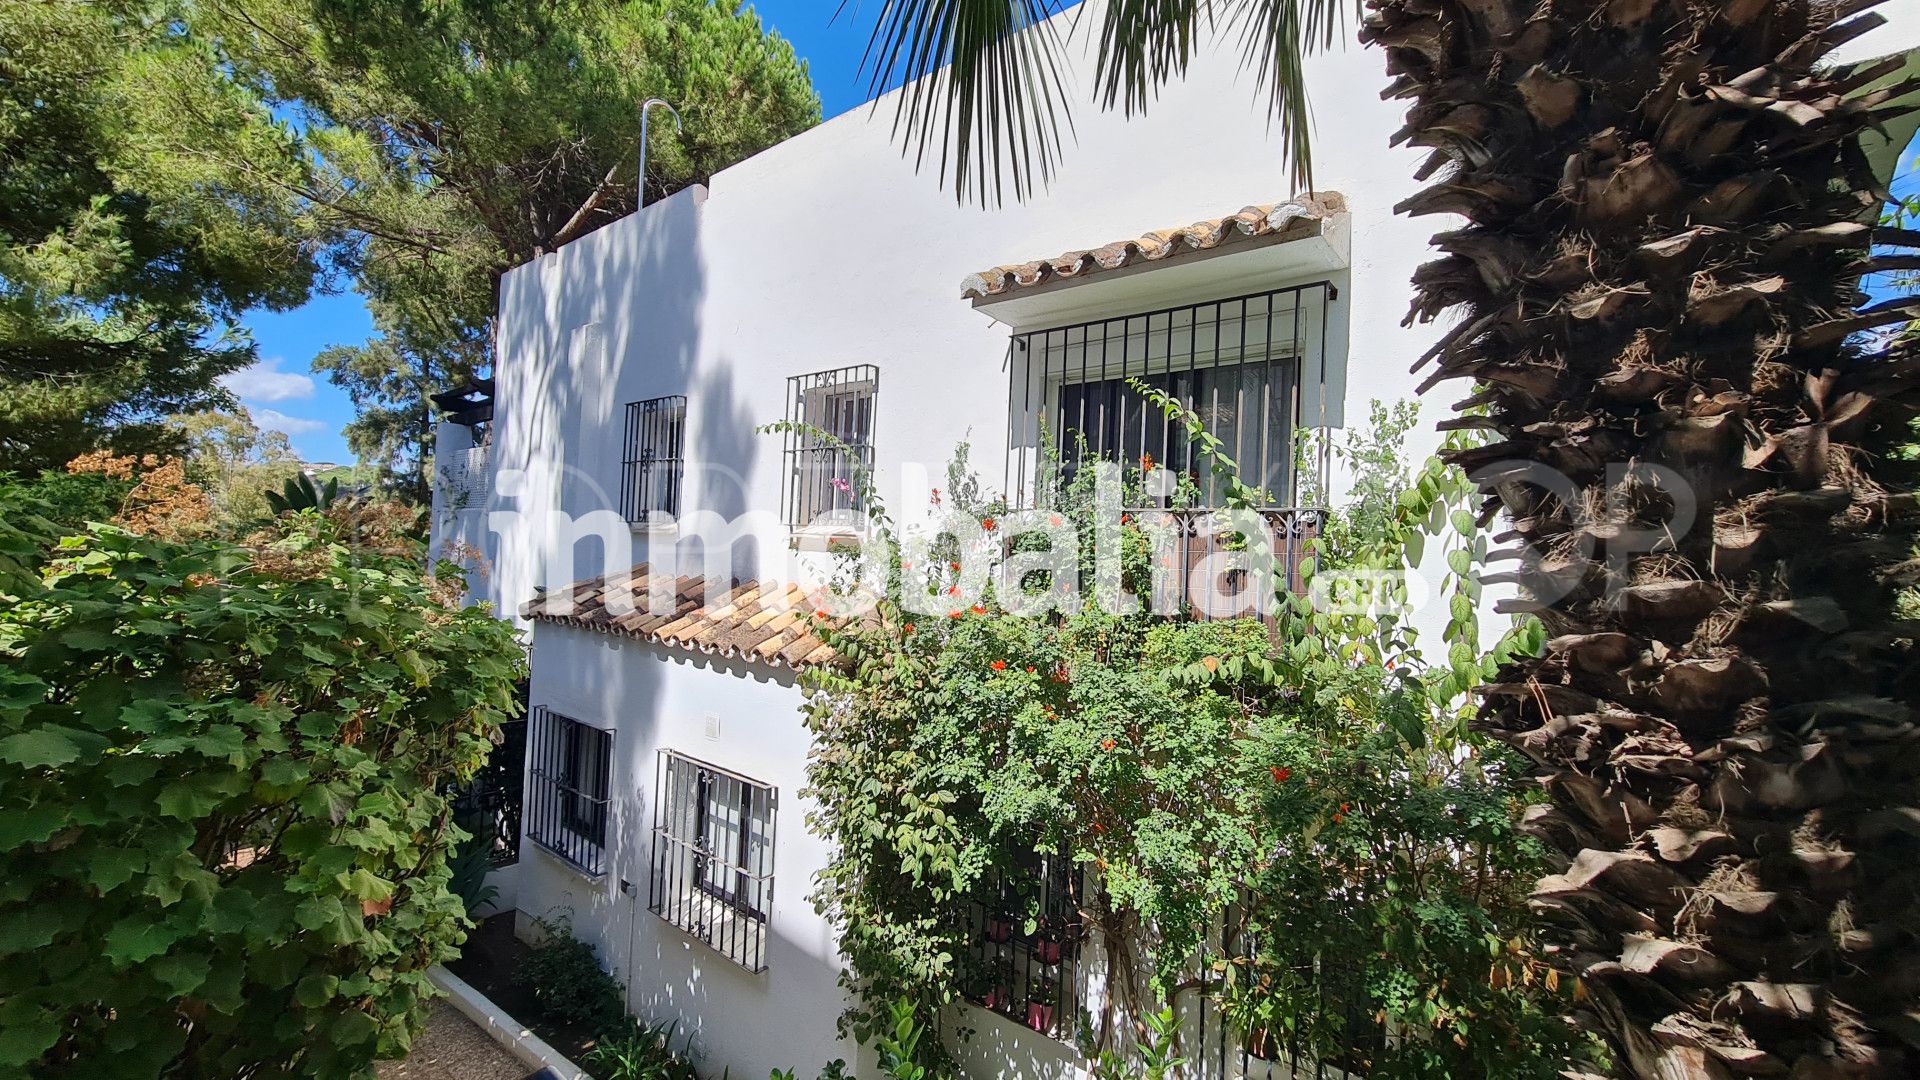 For sale Club Sierra 3 bedrooms town house